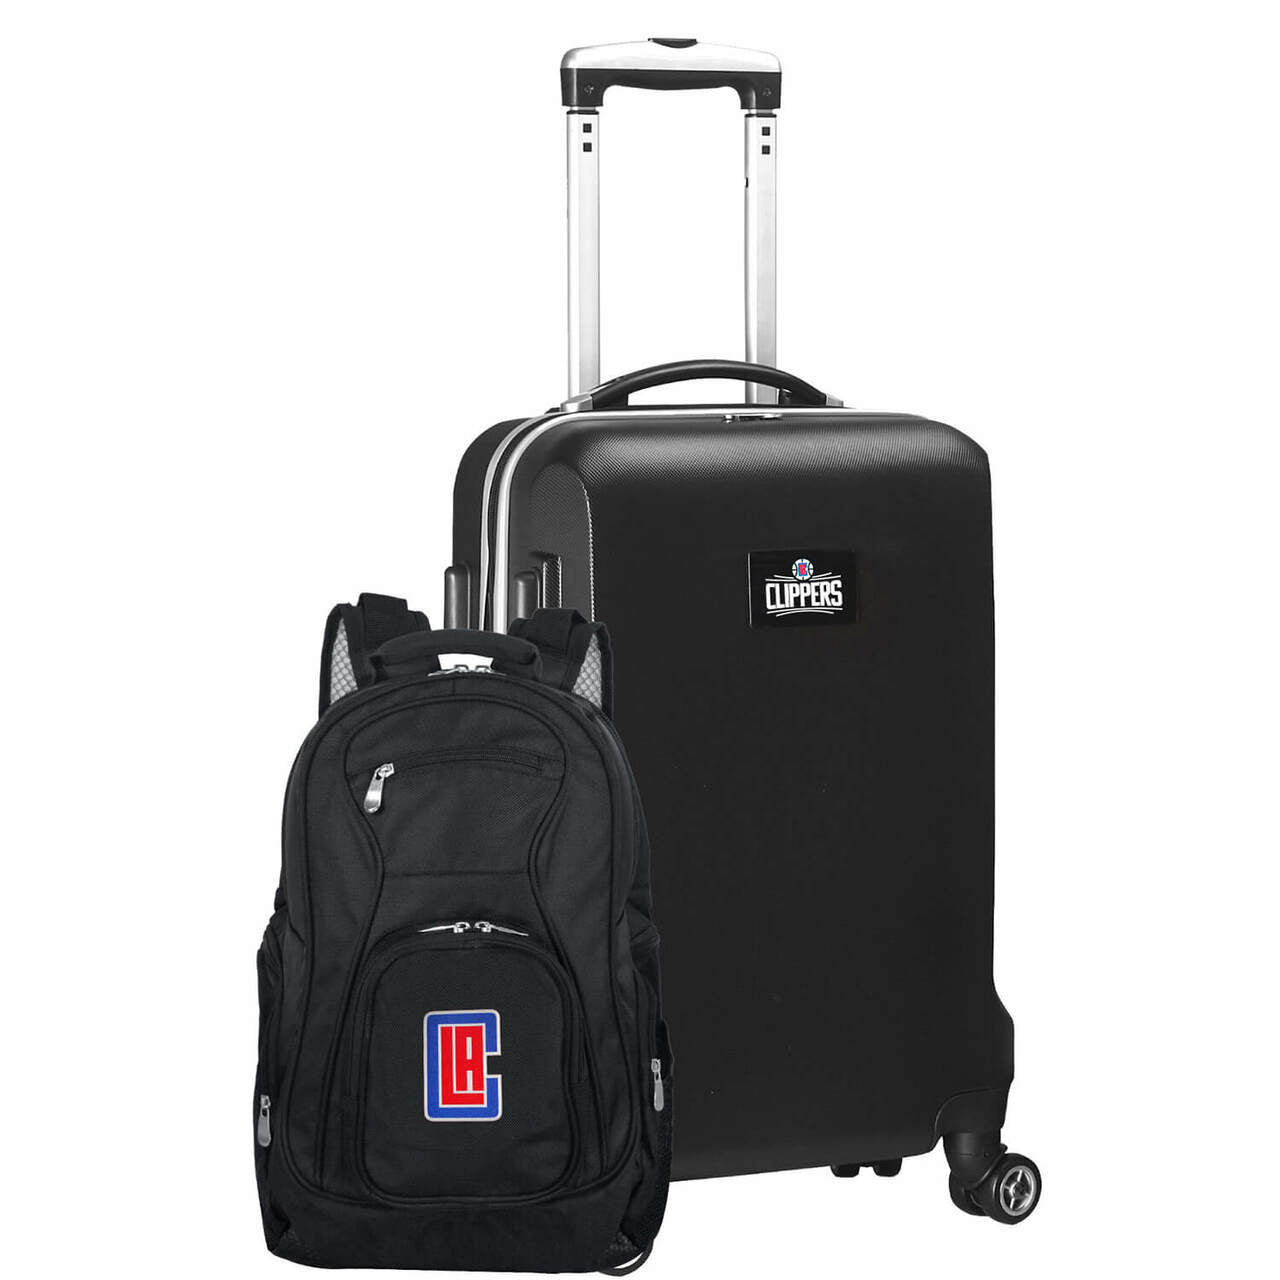 LA Clippers Deluxe 2-Piece Backpack and Carry on Set in Black